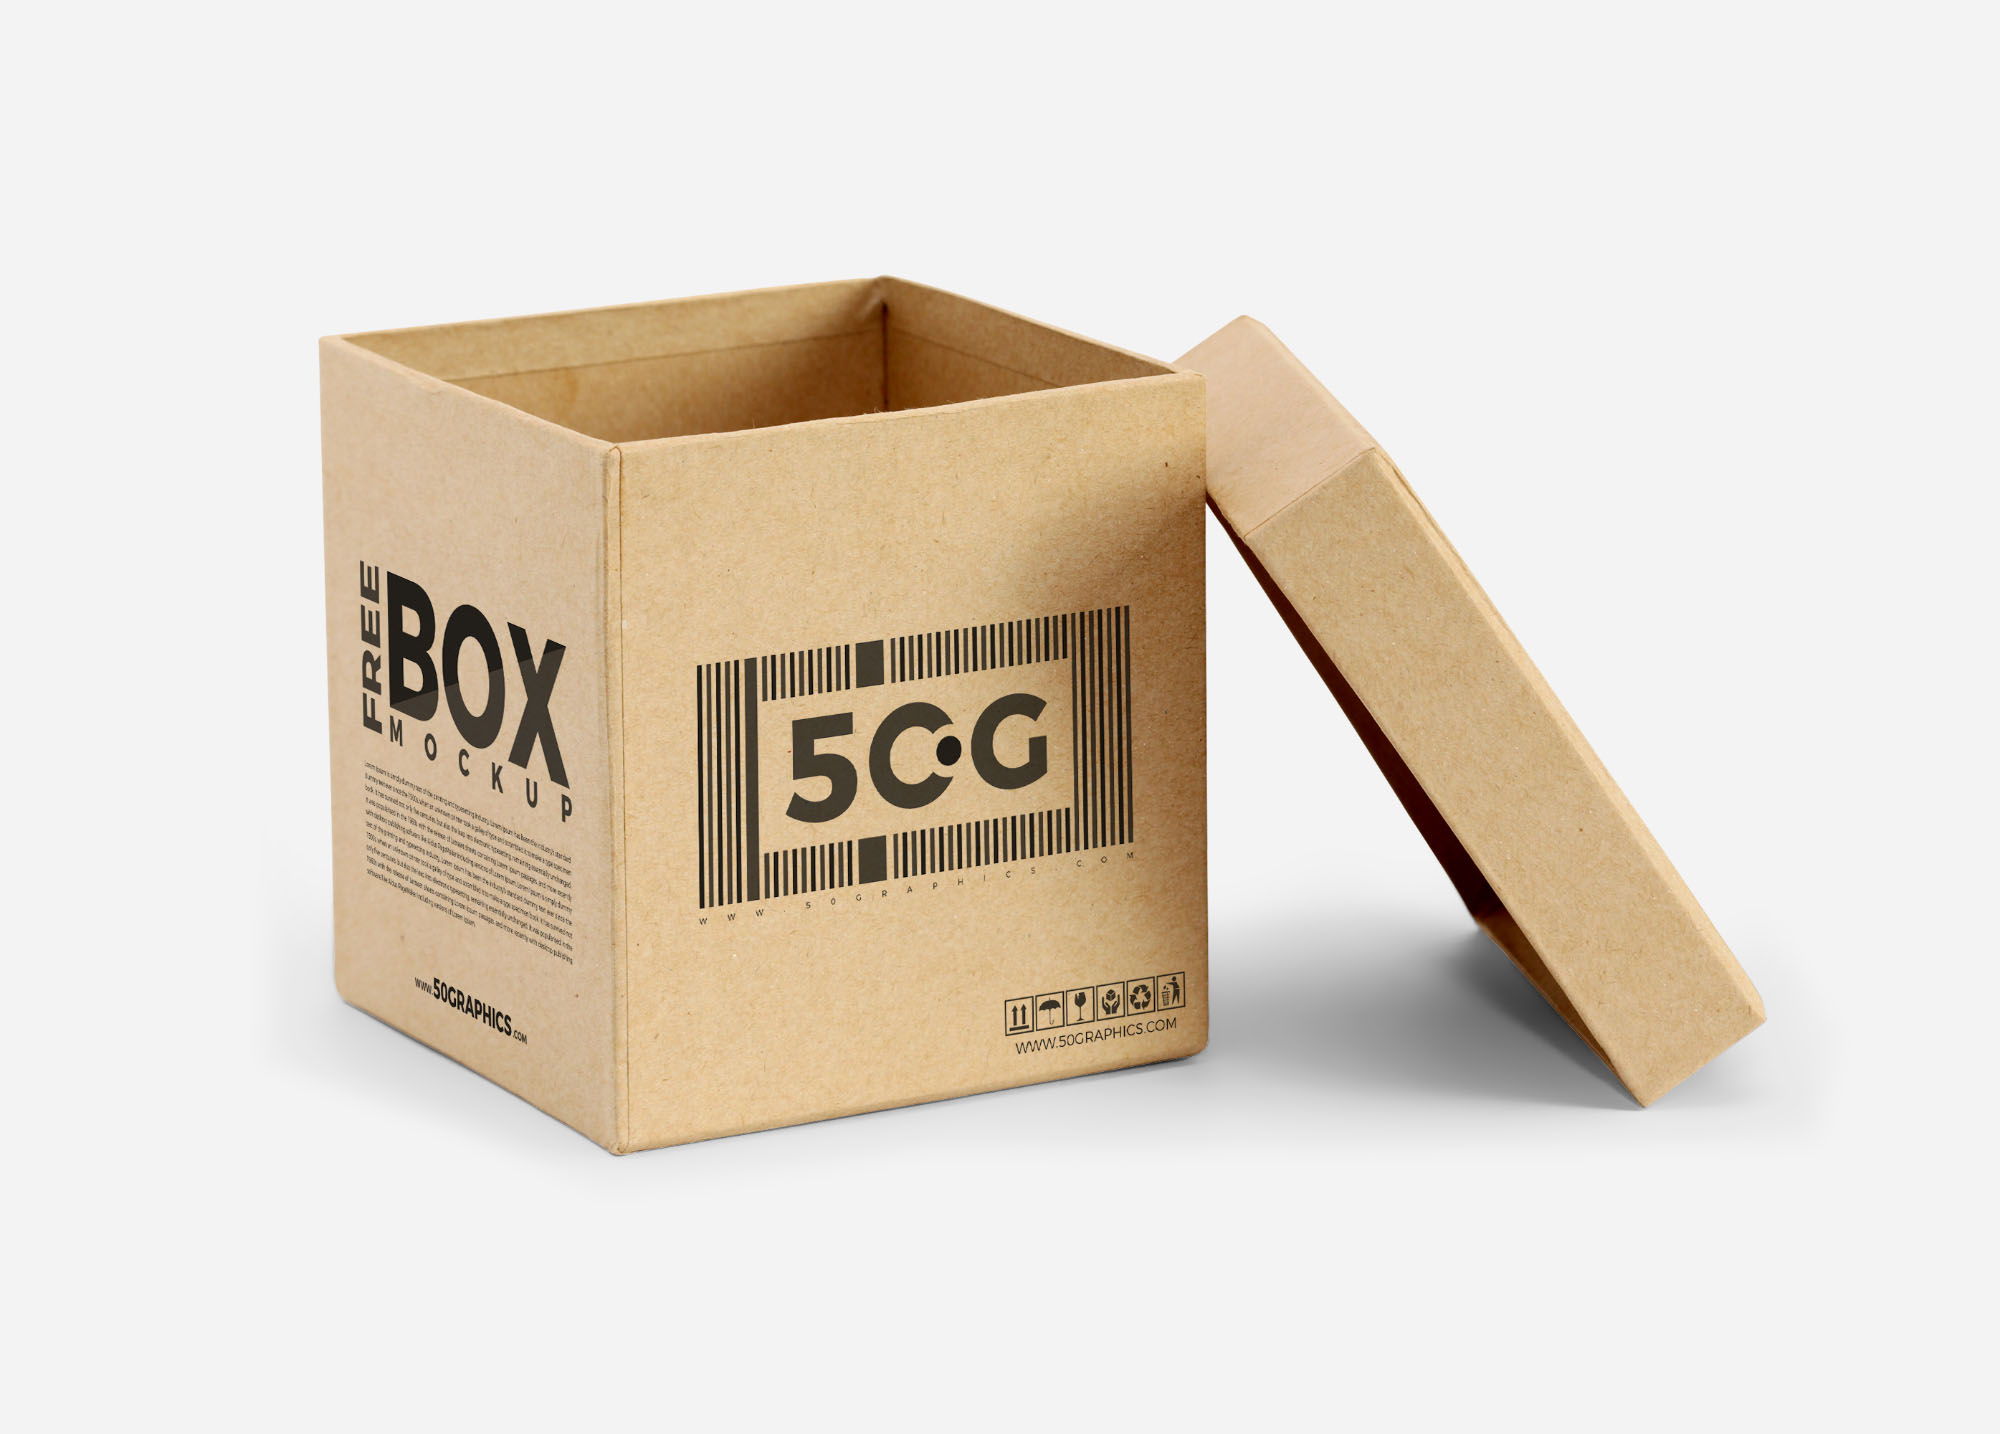 Cool Open Box Mockup, PSD, Free Download